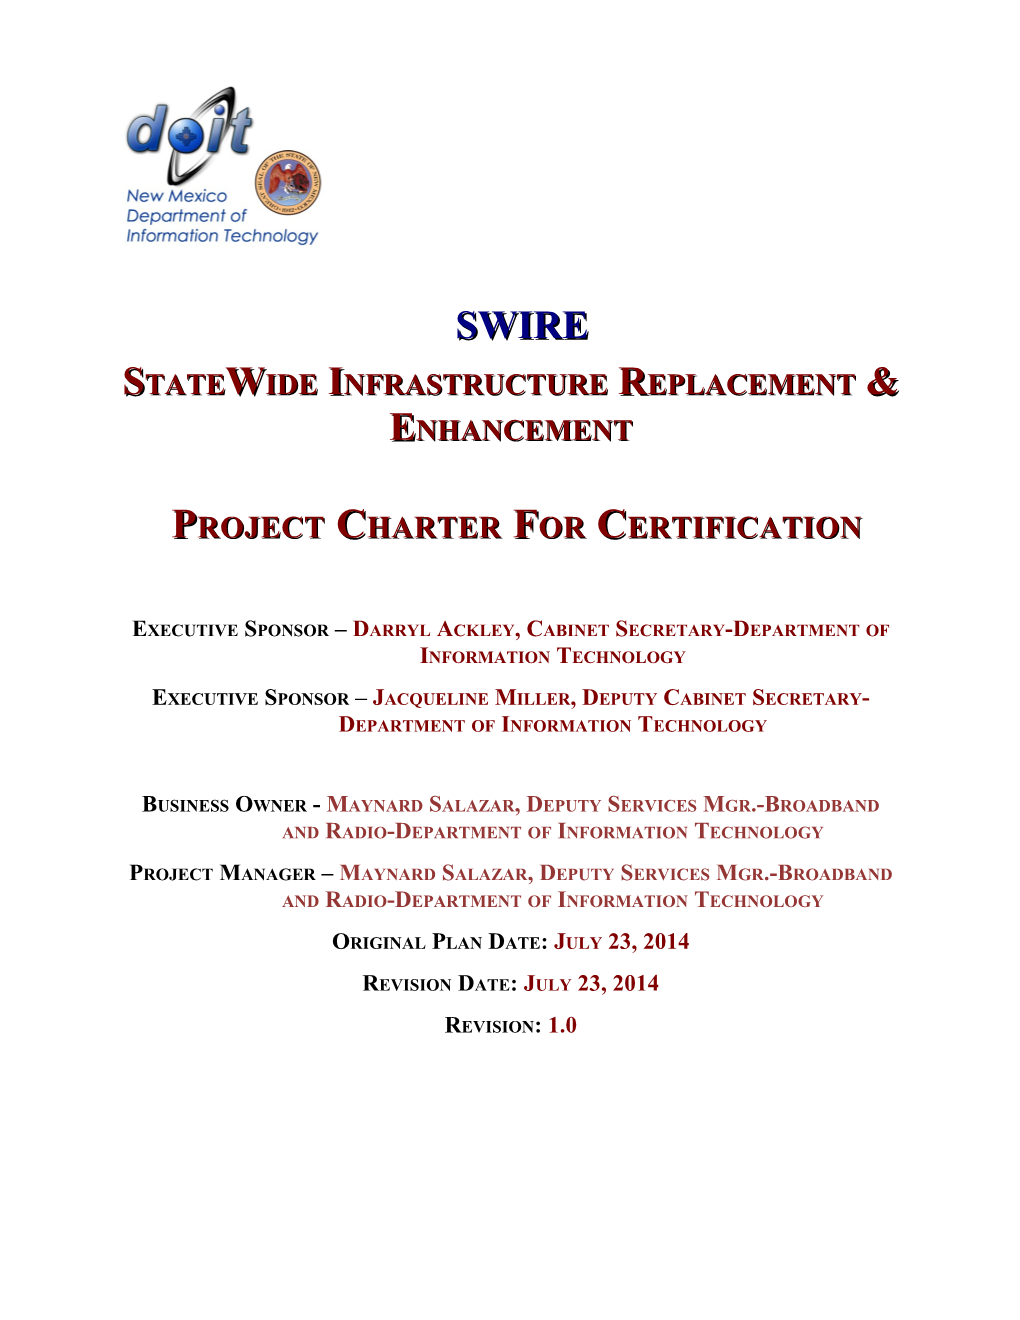 Statewide Infrastructure Replacement & Enhancement